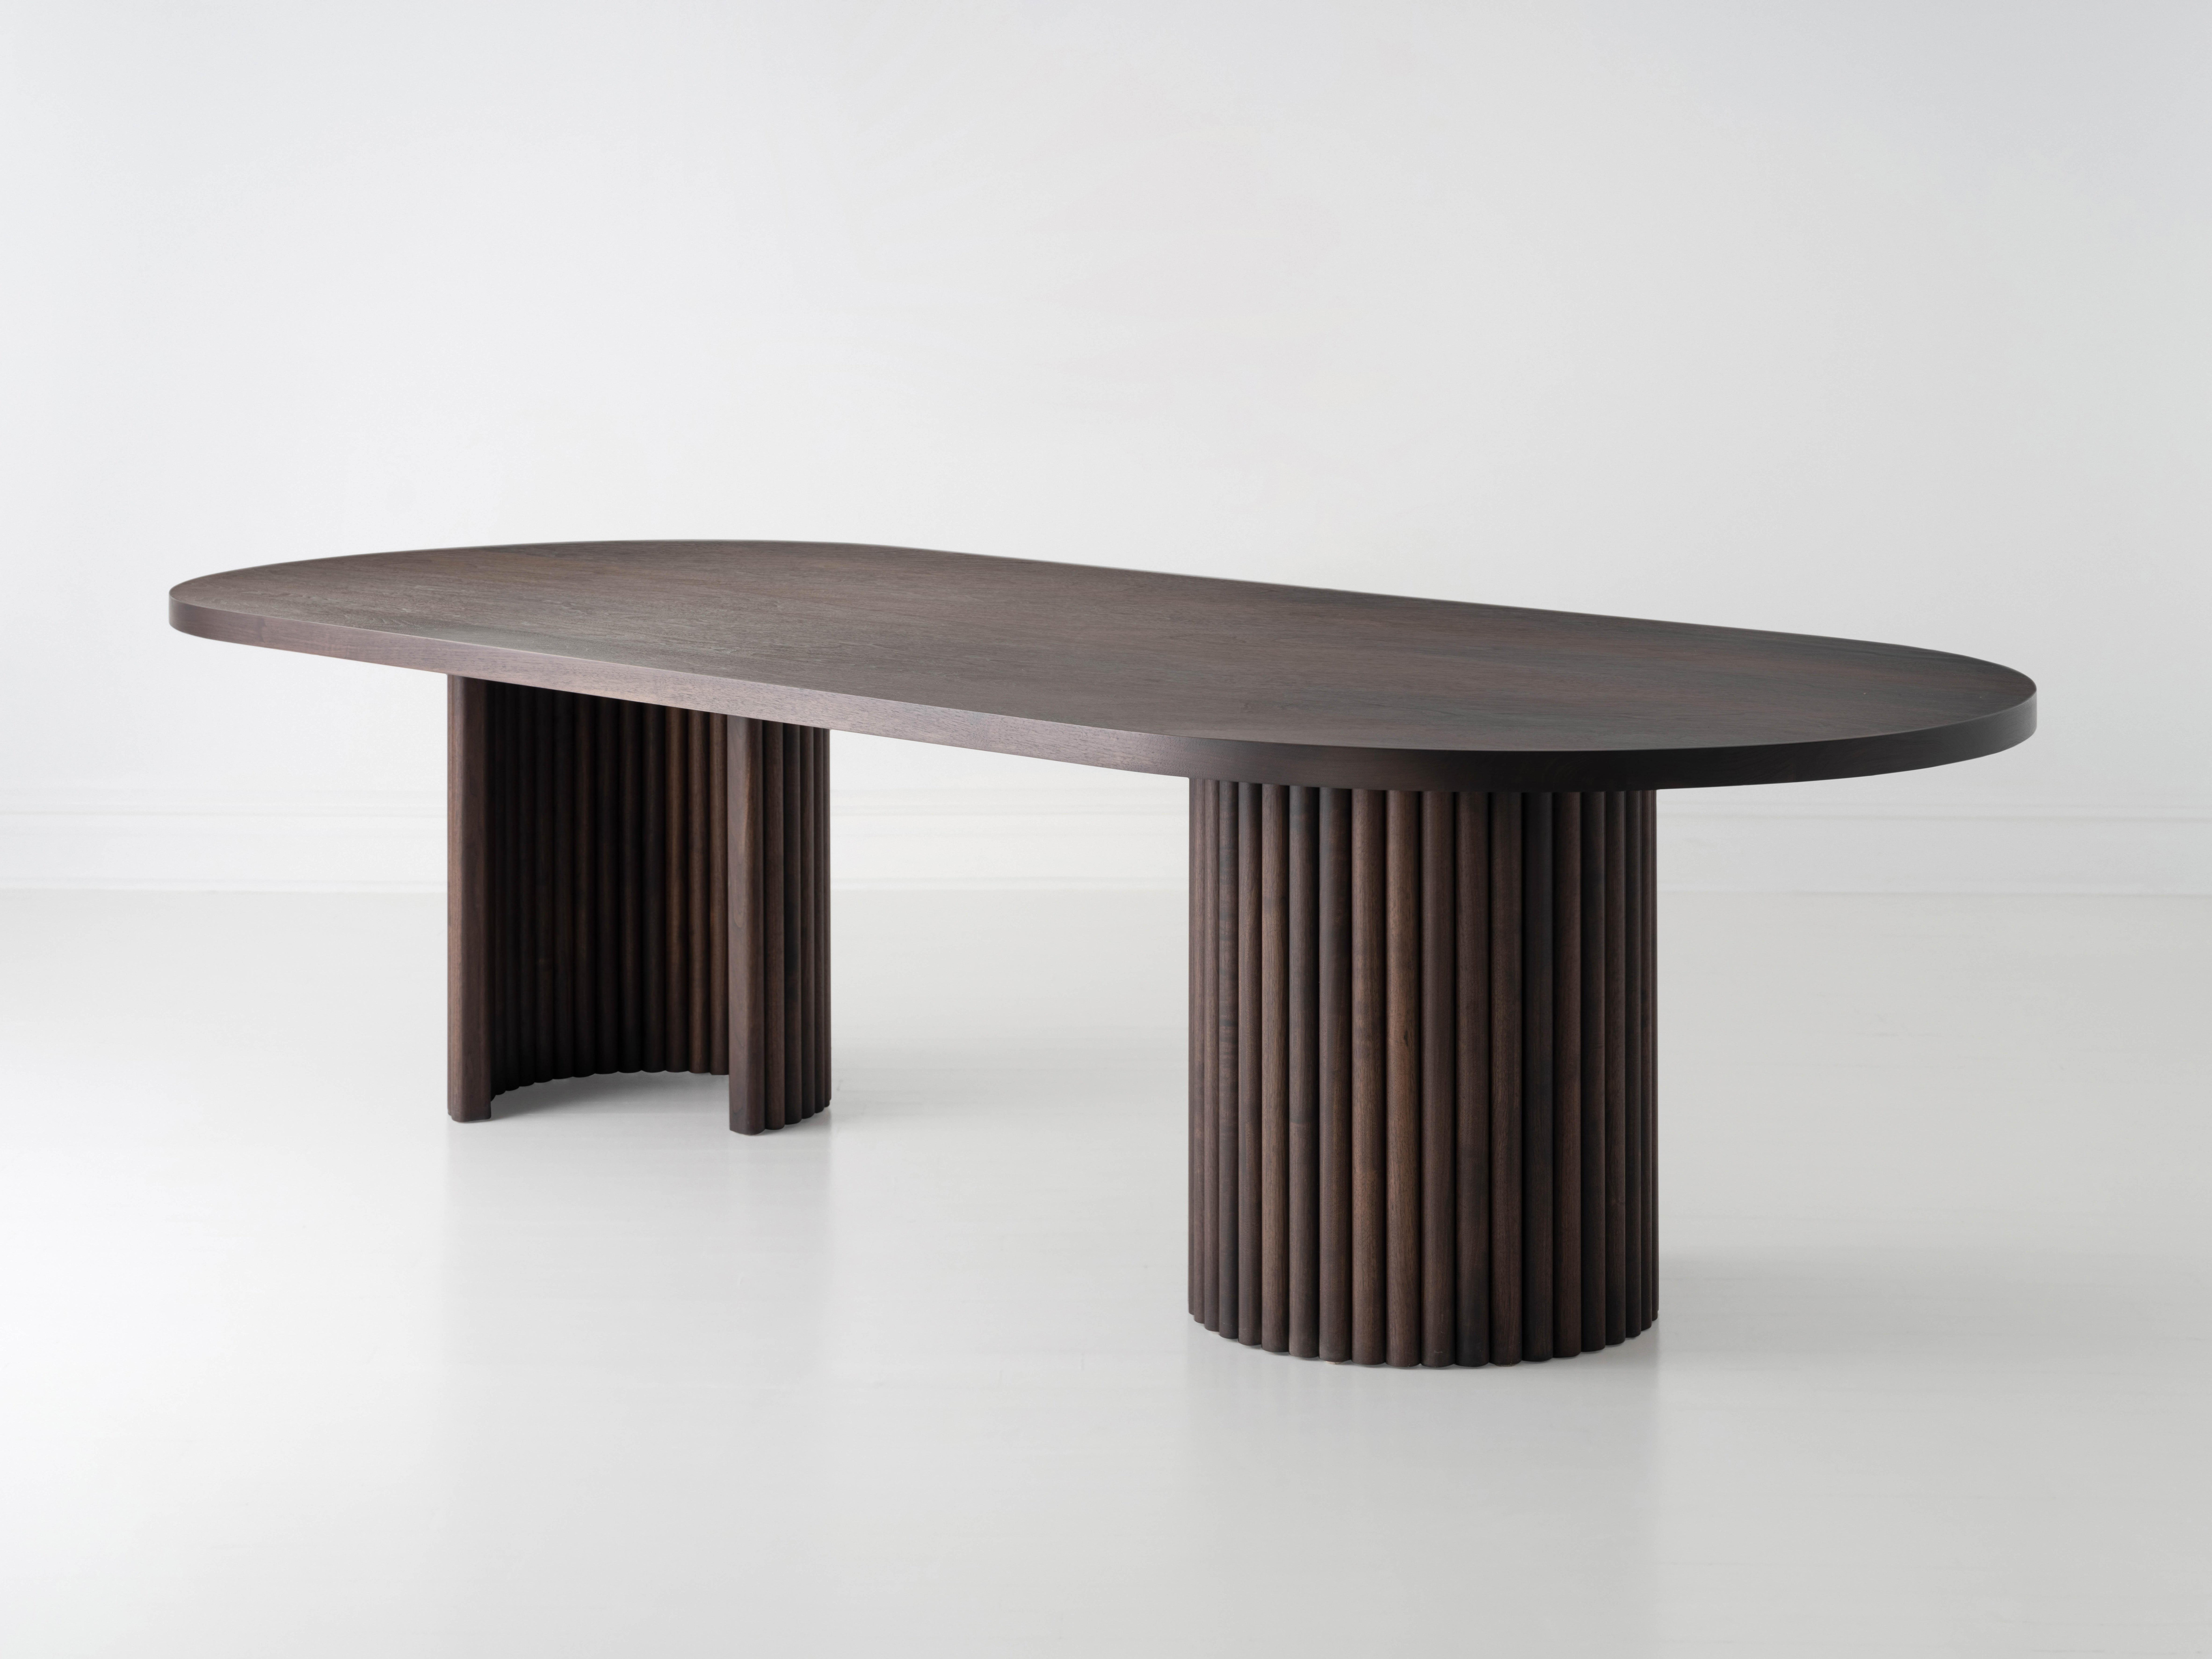 Sculptural Opened Pedestal "Marilyn" Dining Table by Kate Duncan